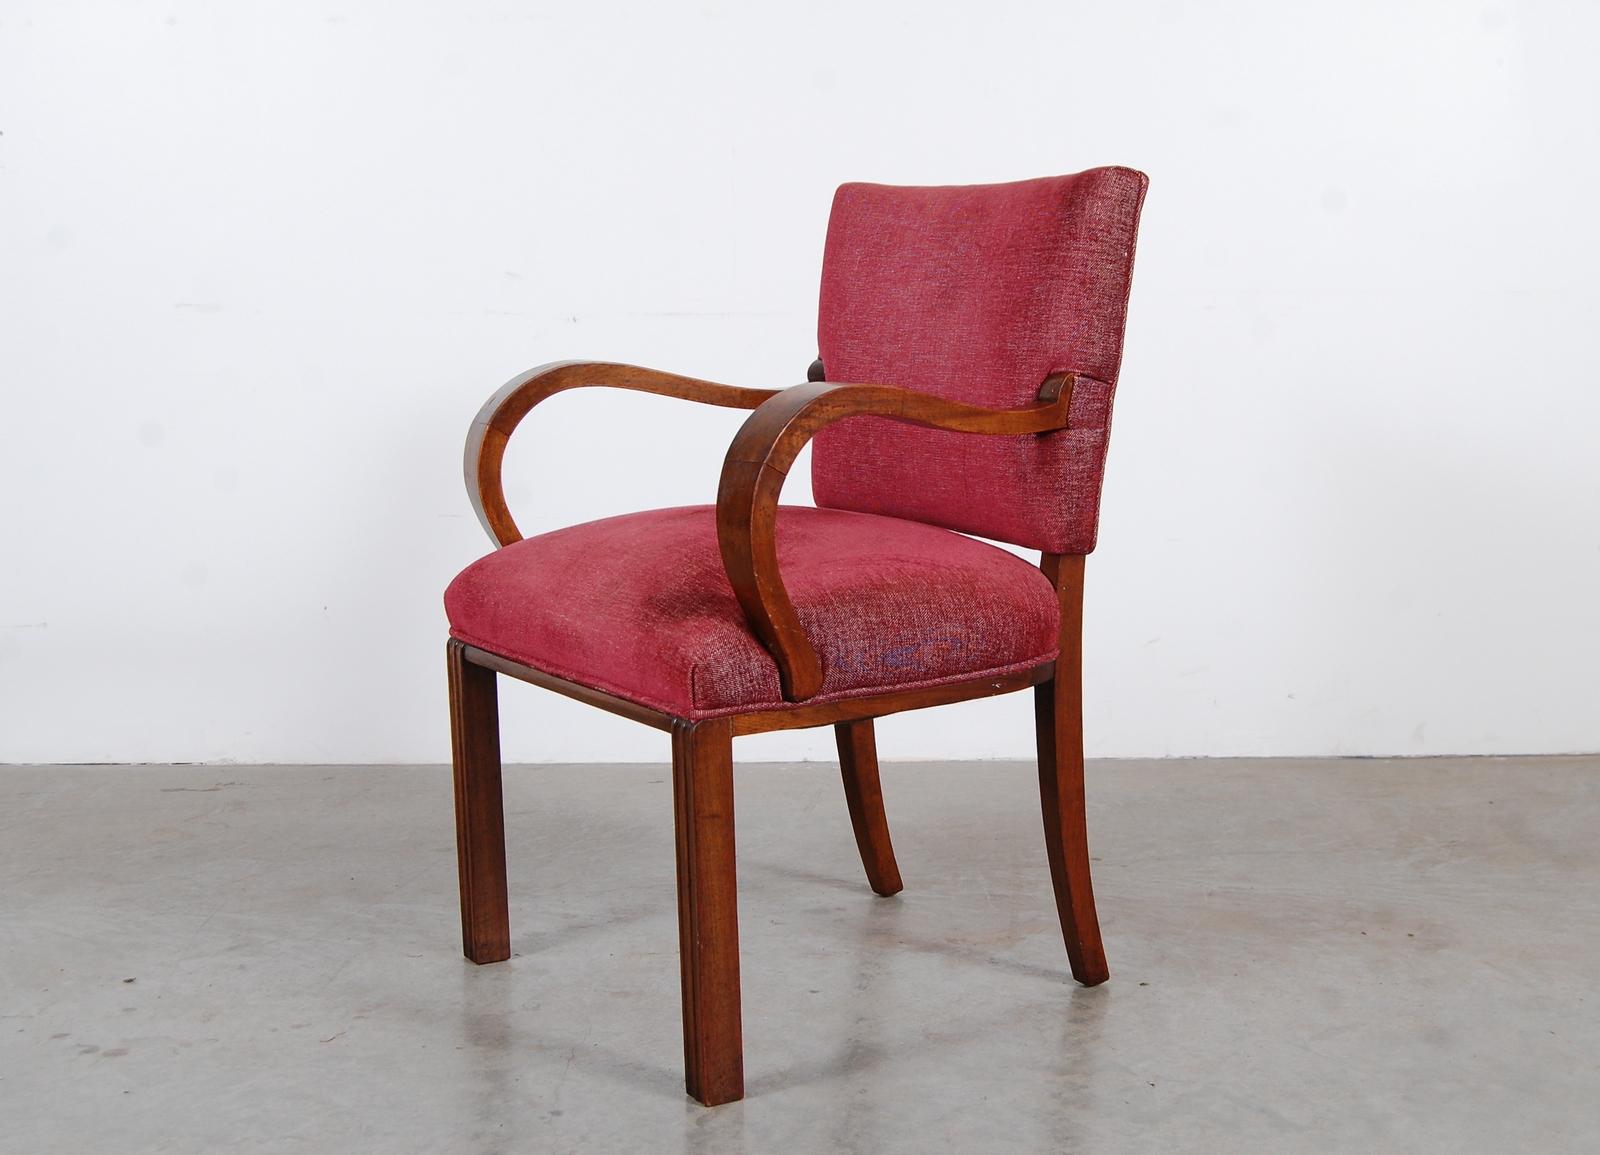 Oversized armchair in walnut, circa 1935. We are unsure of the exact origin of this chair, but feel very strongly that it's European. Possibly Hungarian, German, or Czech. Very well designed and constructed. The front of the legs are fluted, and